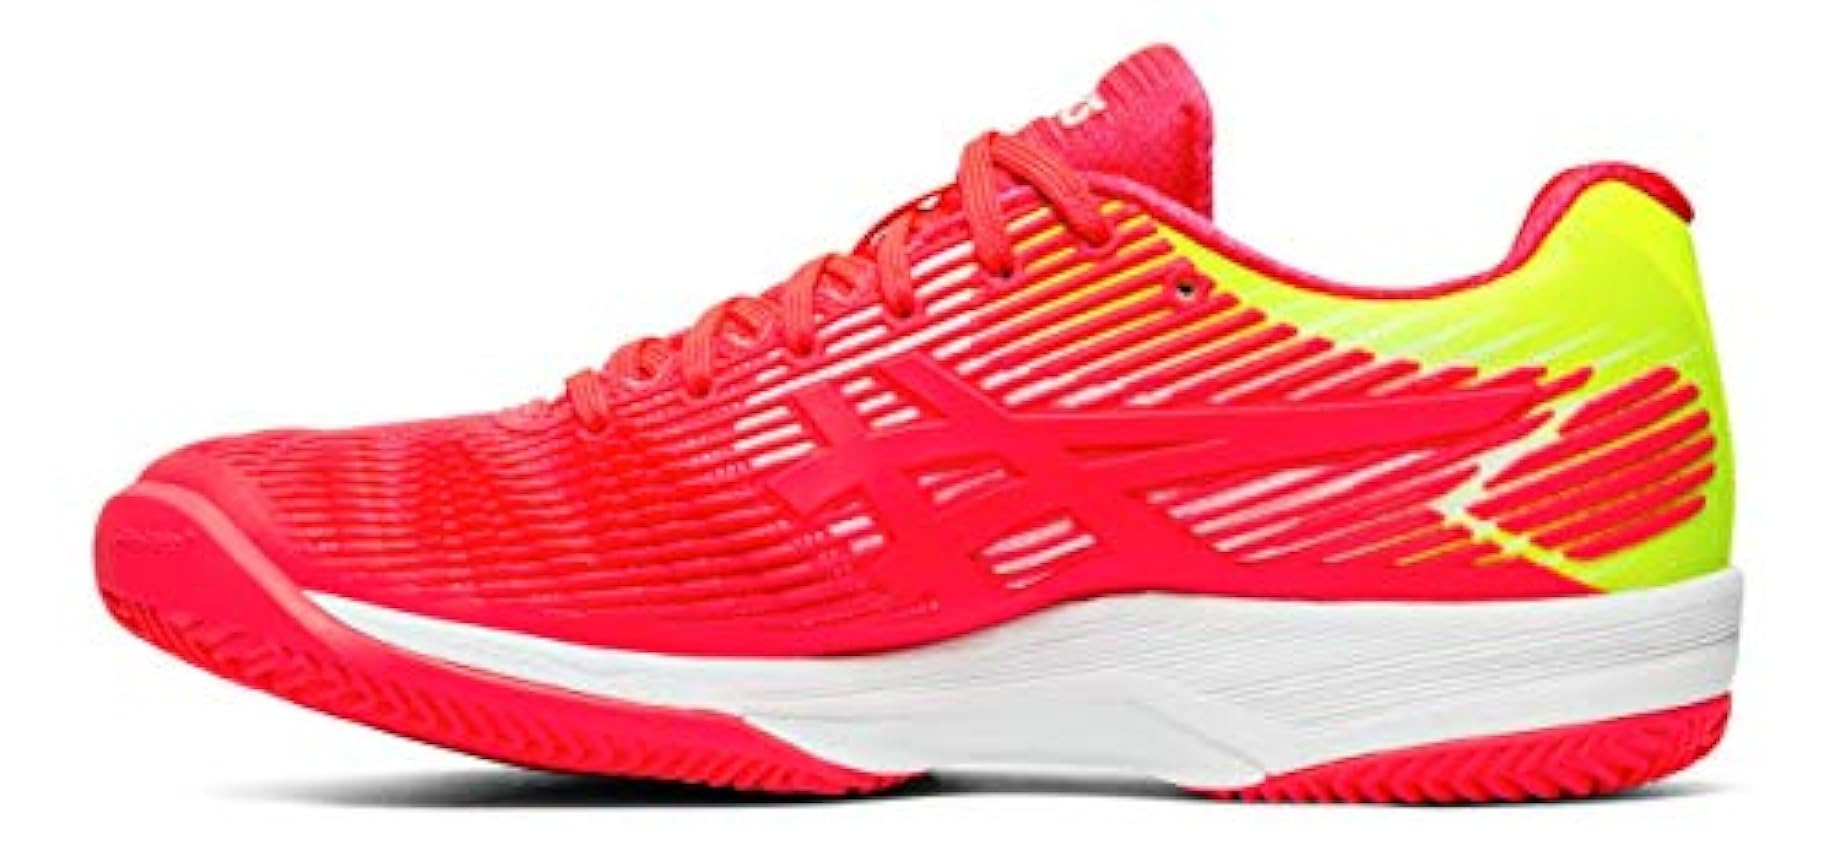 ASICS Women´s Solution Speed FF Clay Tennis Shoes, Laser Pink/White, 6.5 M US cy3uk2Sk